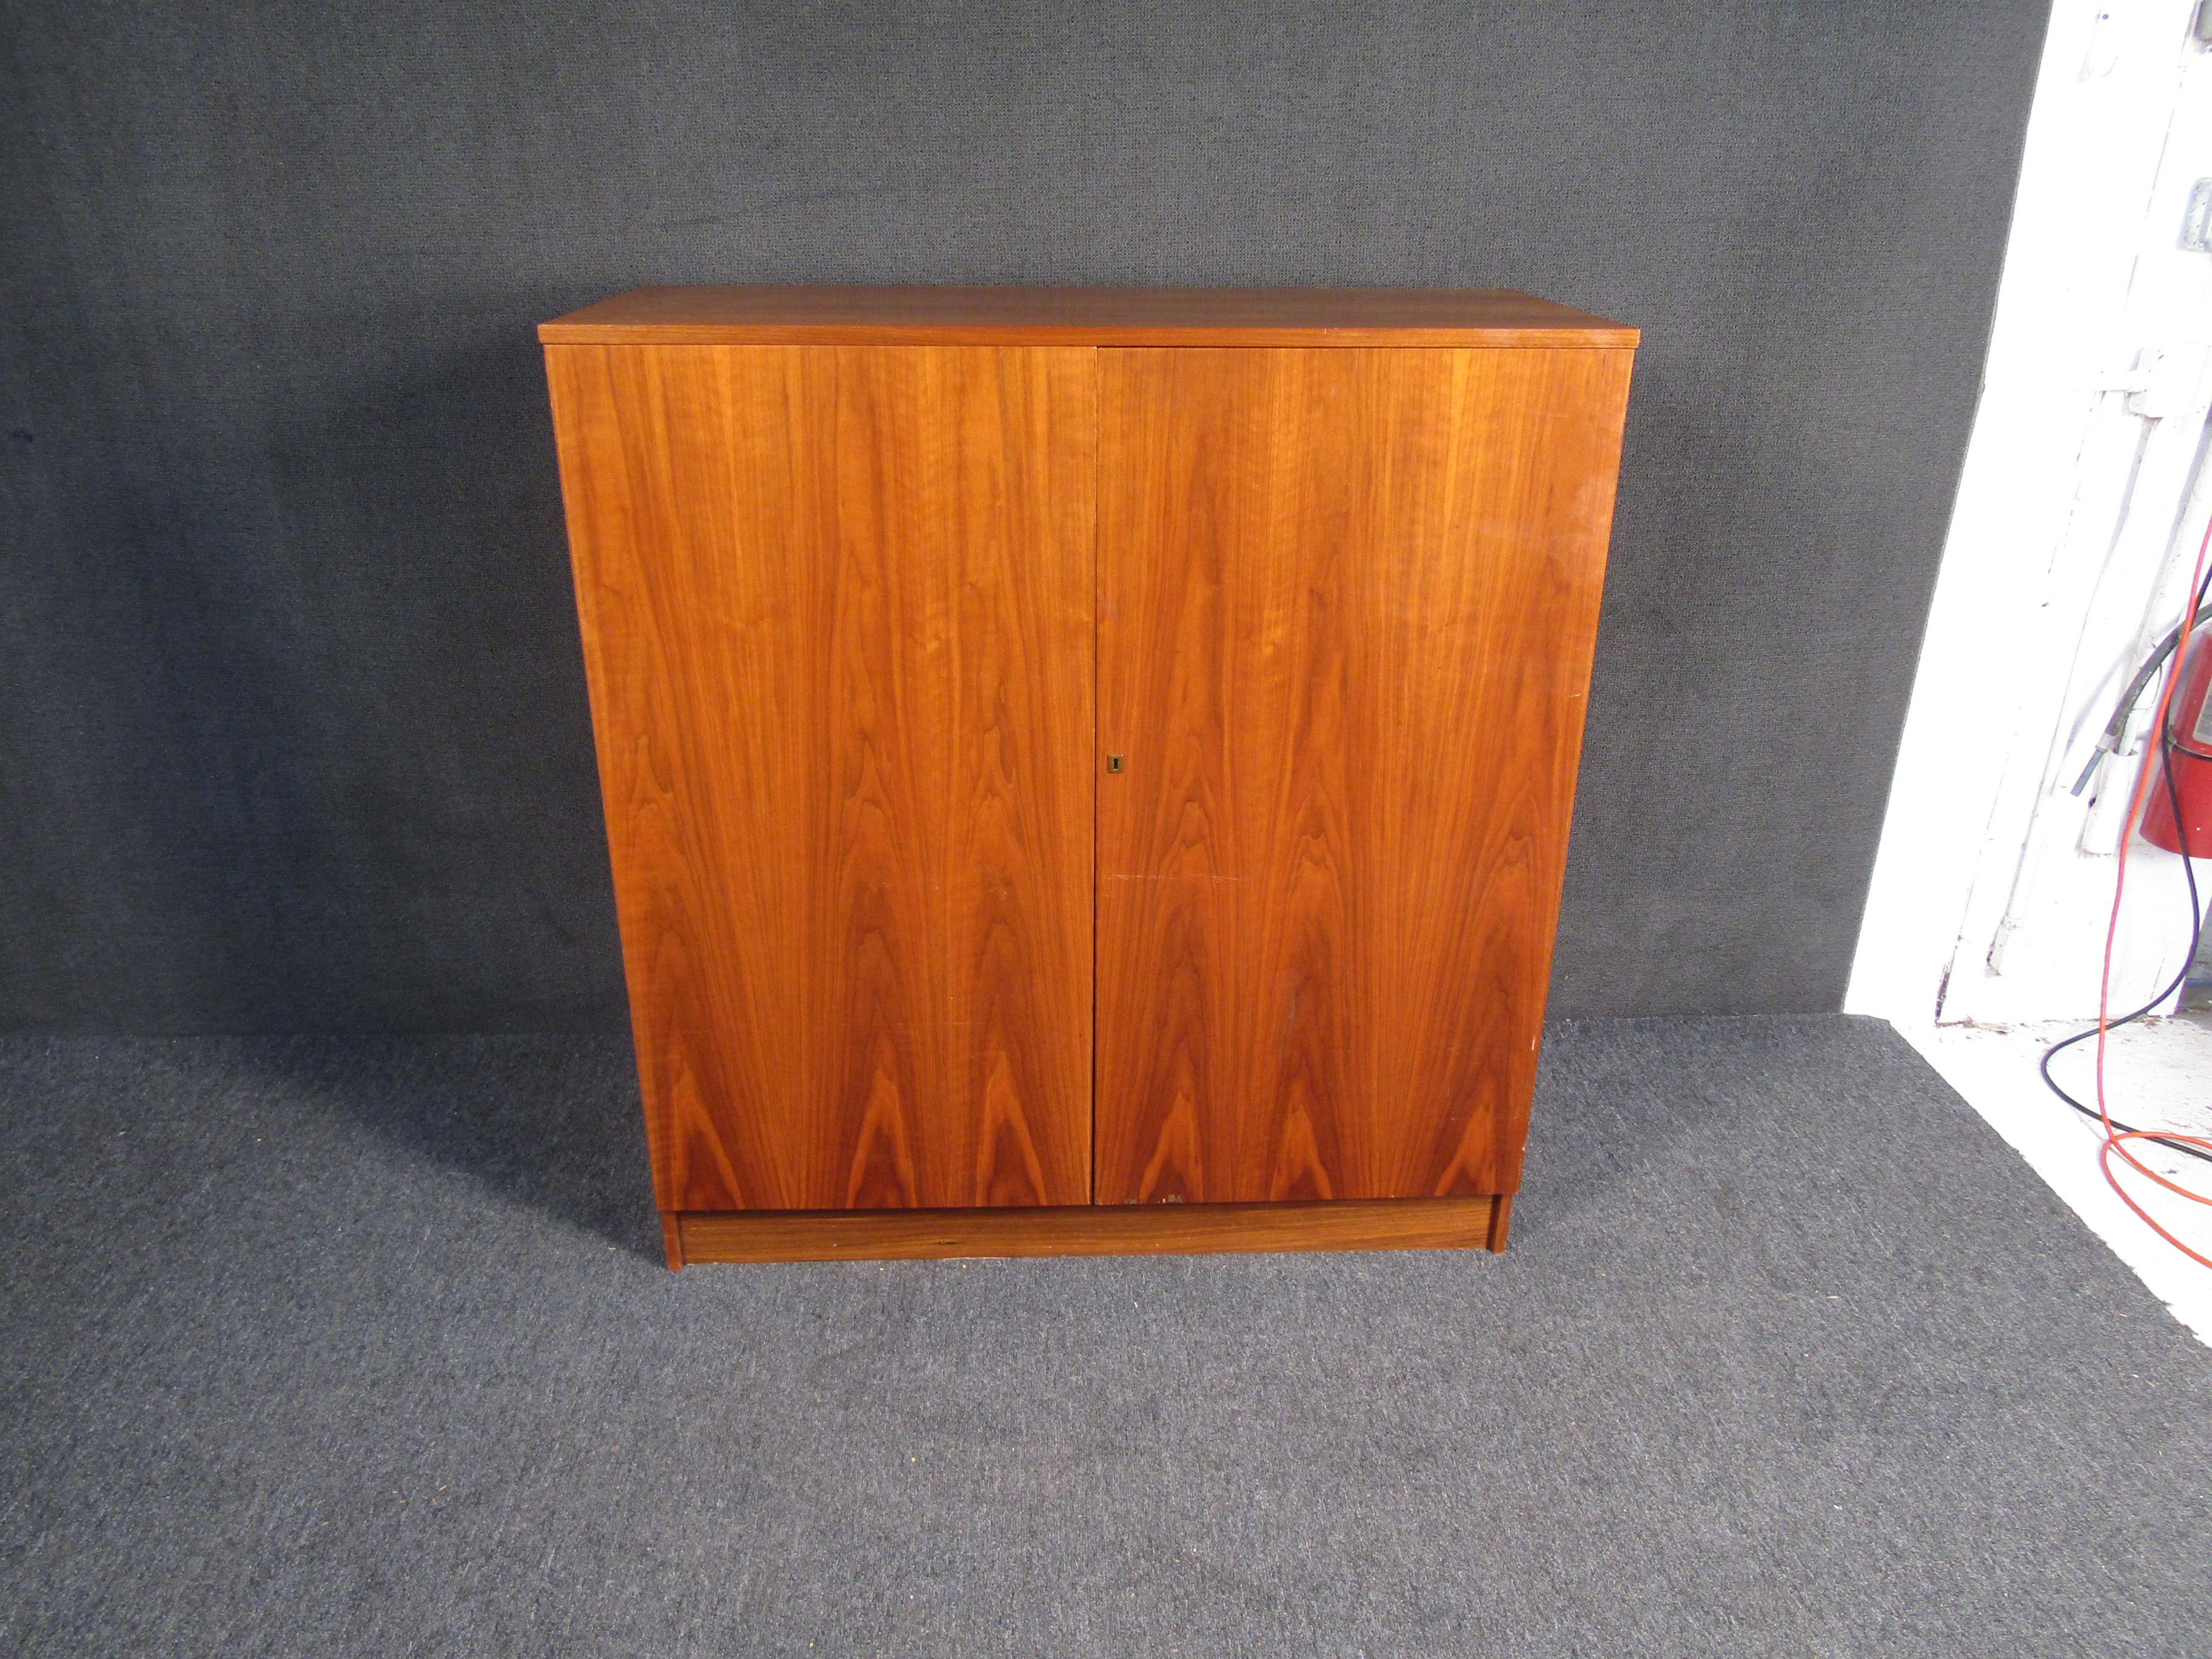 Rare and unique secretary desk finished in Teak. This Danish modern style secretary desk features 1 drawer and multiple shelves to file away paperwork and desk accessories. When not in use the writing surface folds up, and still allows access to the